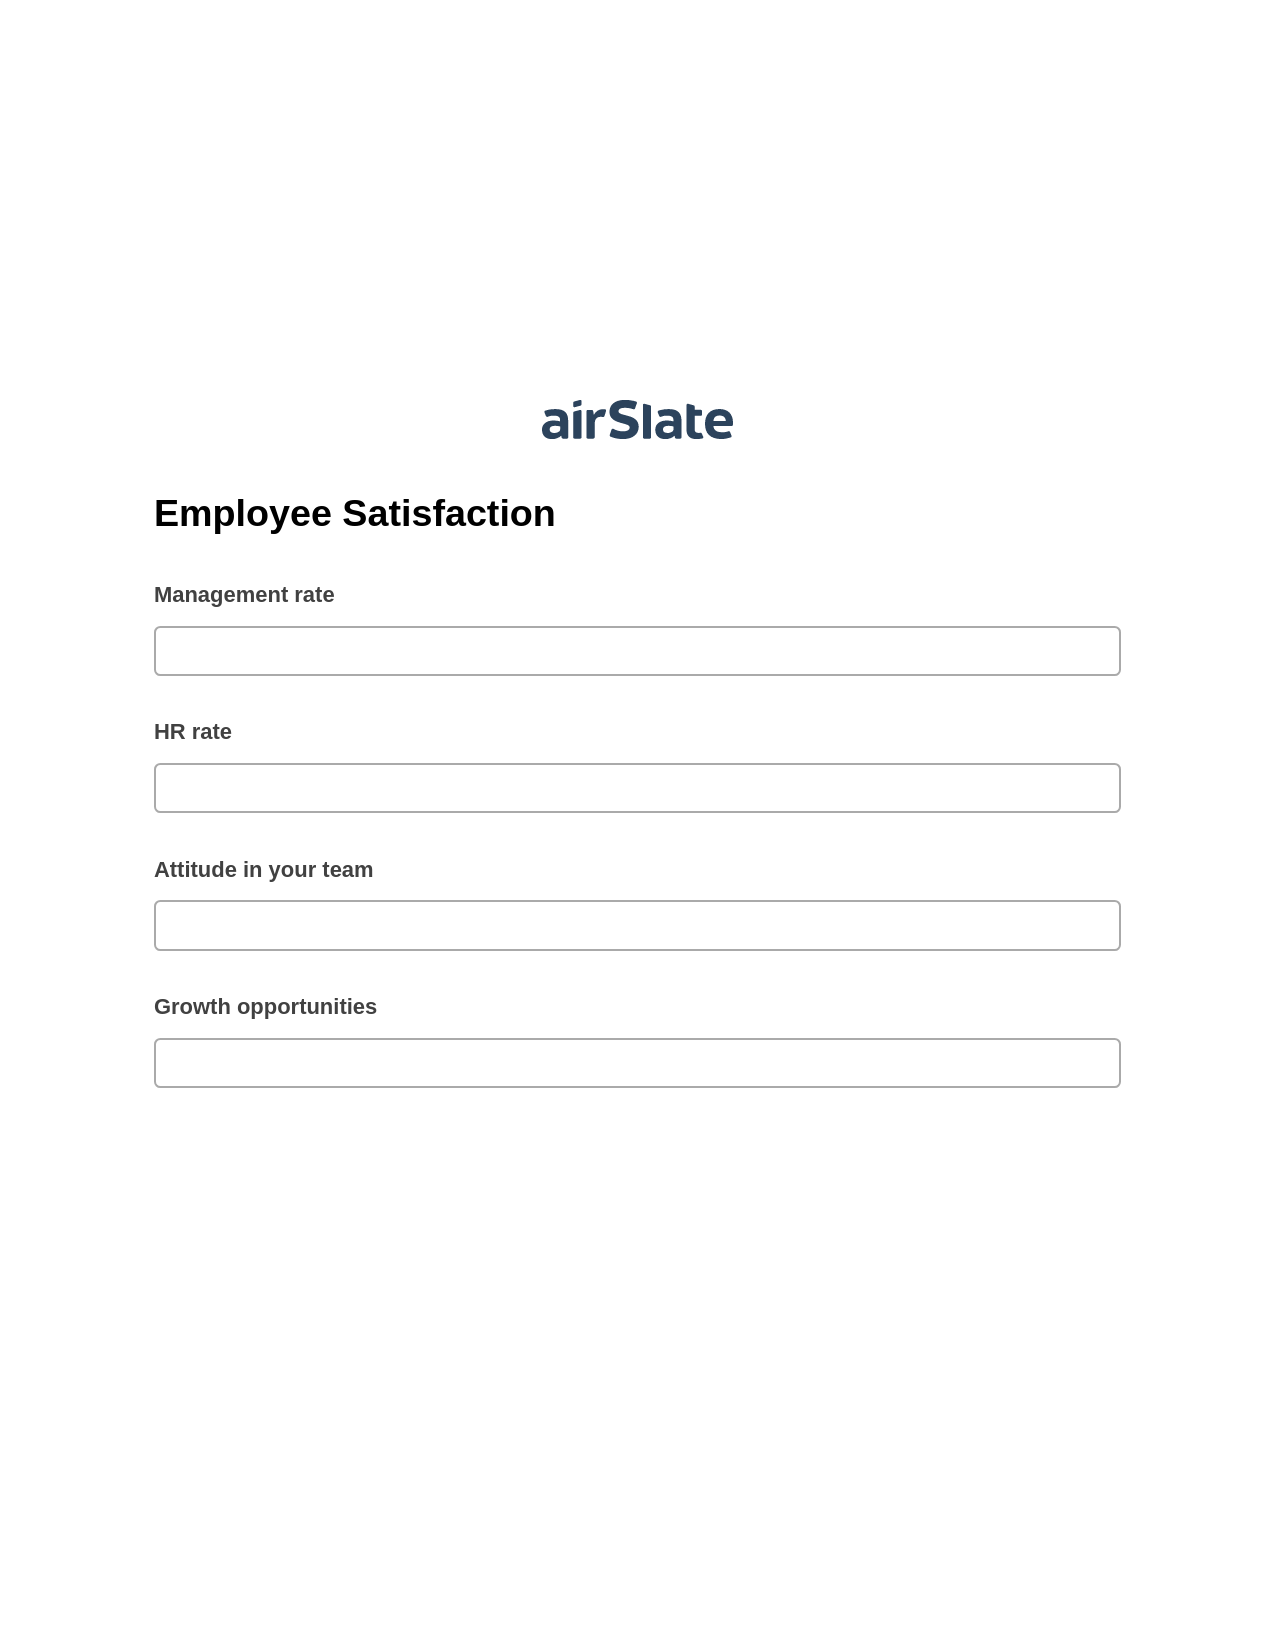 Employee Satisfaction Pre-fill from MySQL Bot, Roles Reminder Bot, Post-finish Document Bot